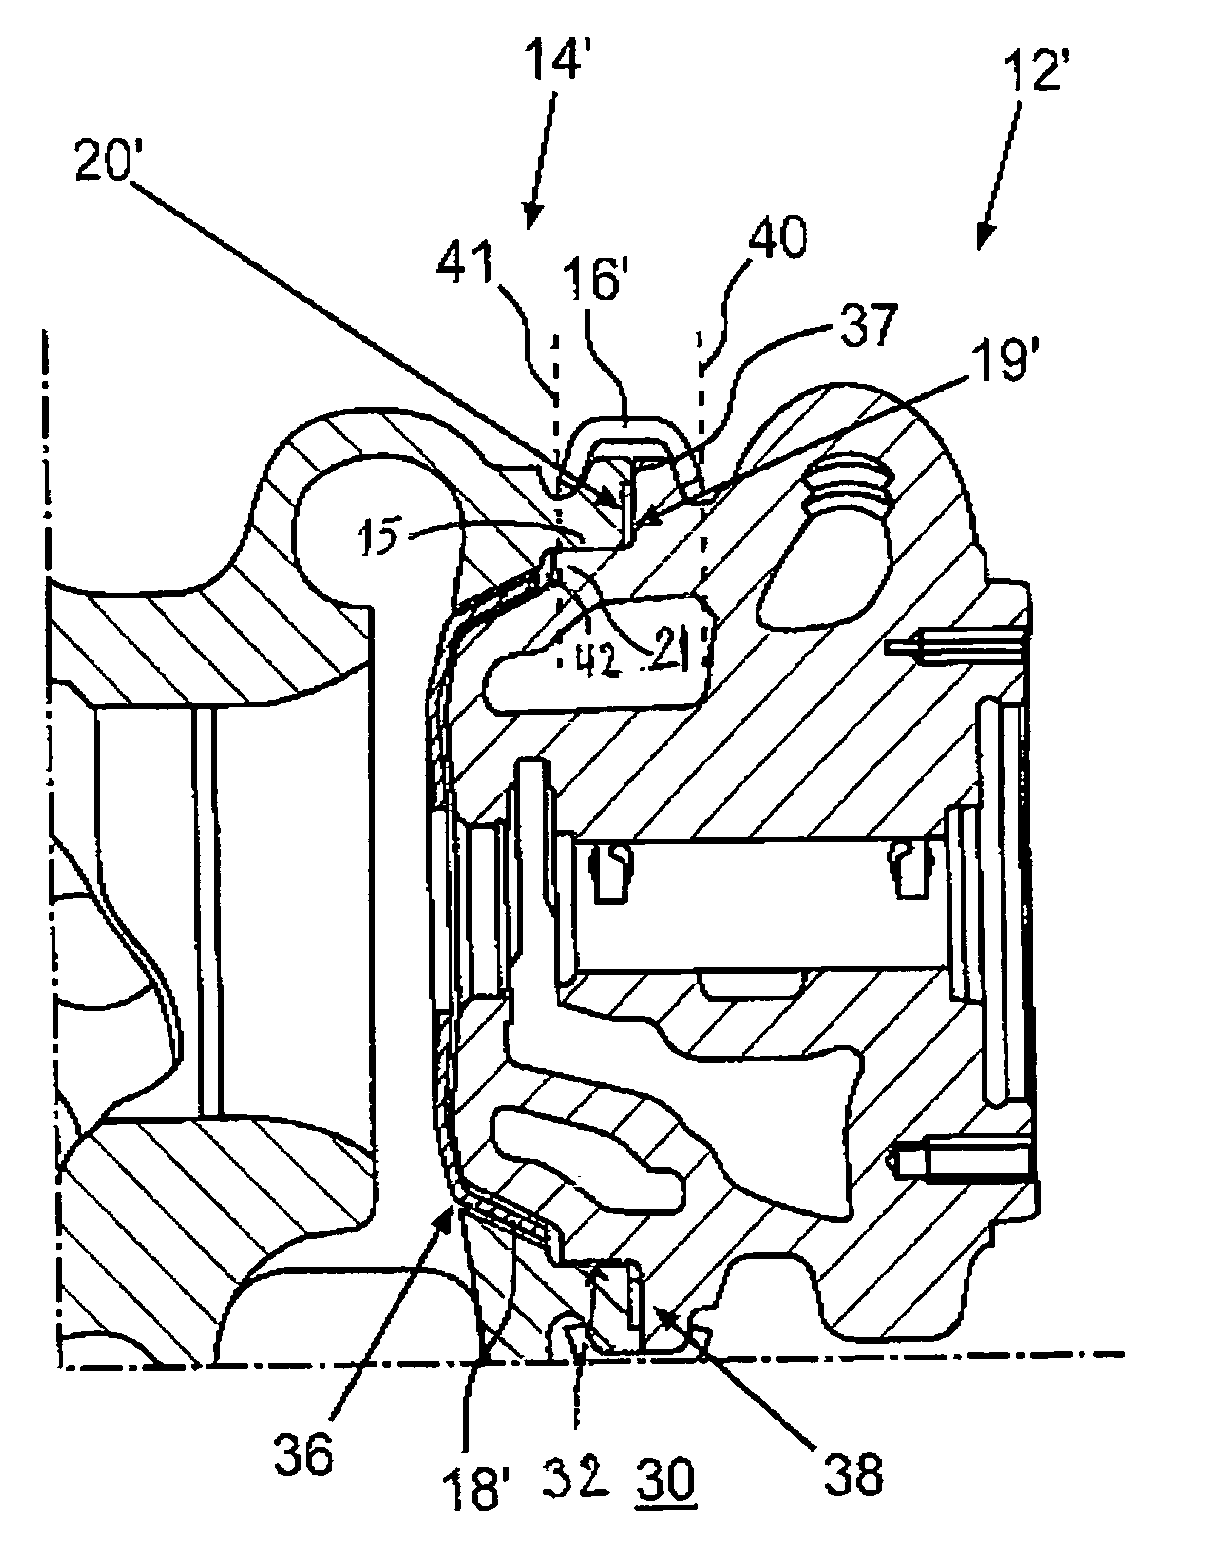 Connection assembly for joining a turbine housing and a bearing housing and exhaust gas turbocharger